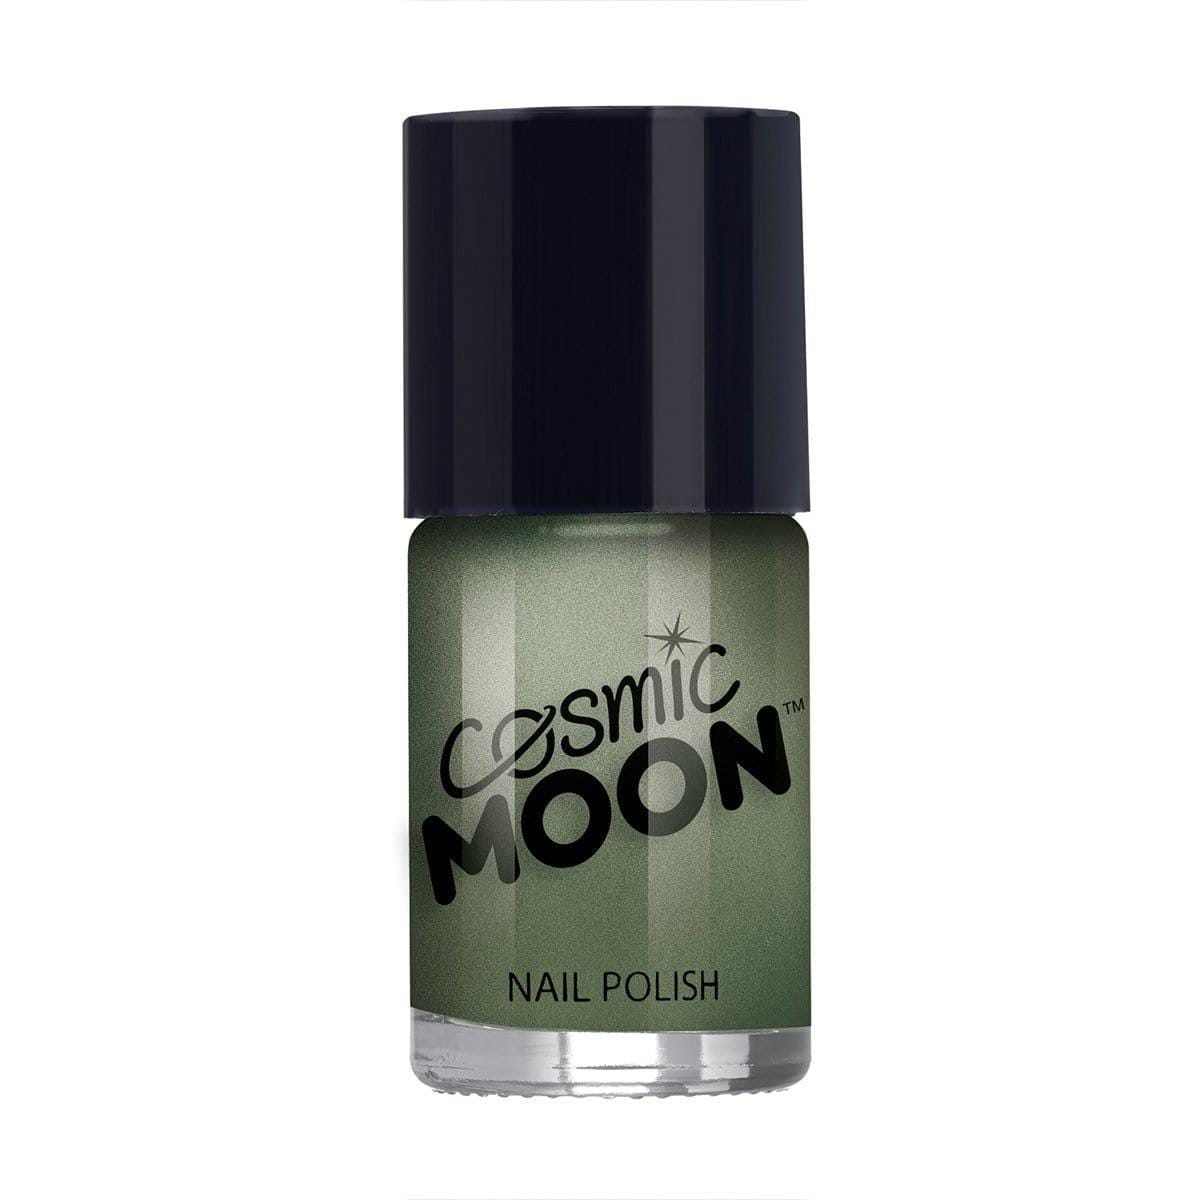 Buy Costume Accessories Moon green metallic nail polish sold at Party Expert